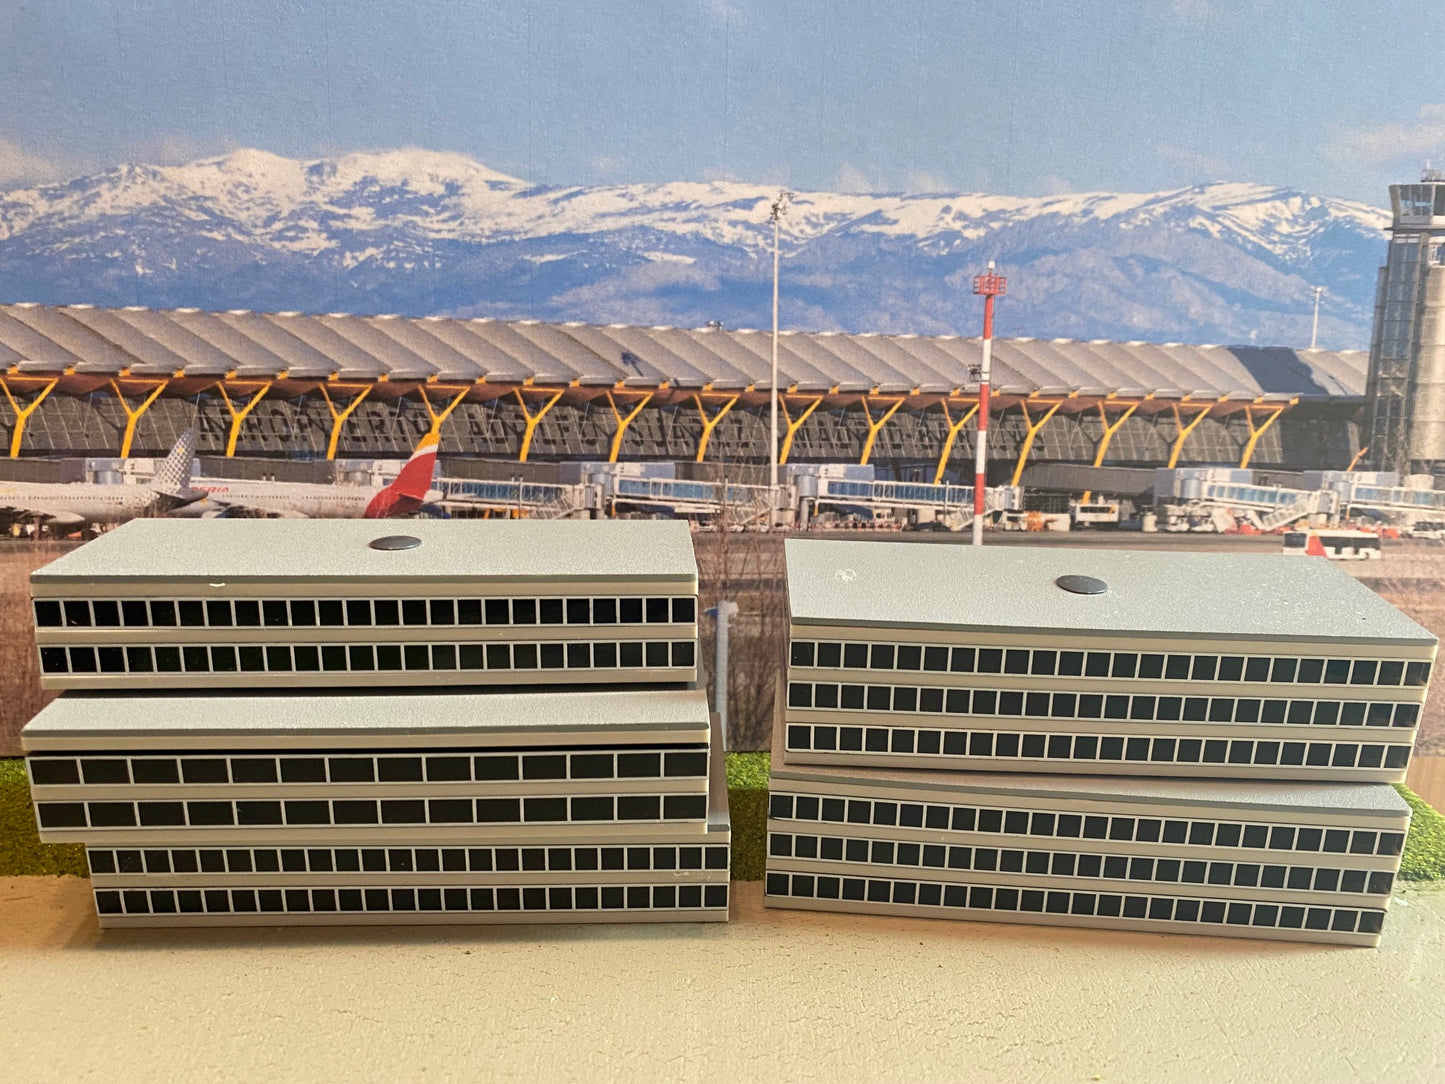 1/500 Departure Halls Without Recess Herpa Wings 519656 *Potentially incomplete and worn box*